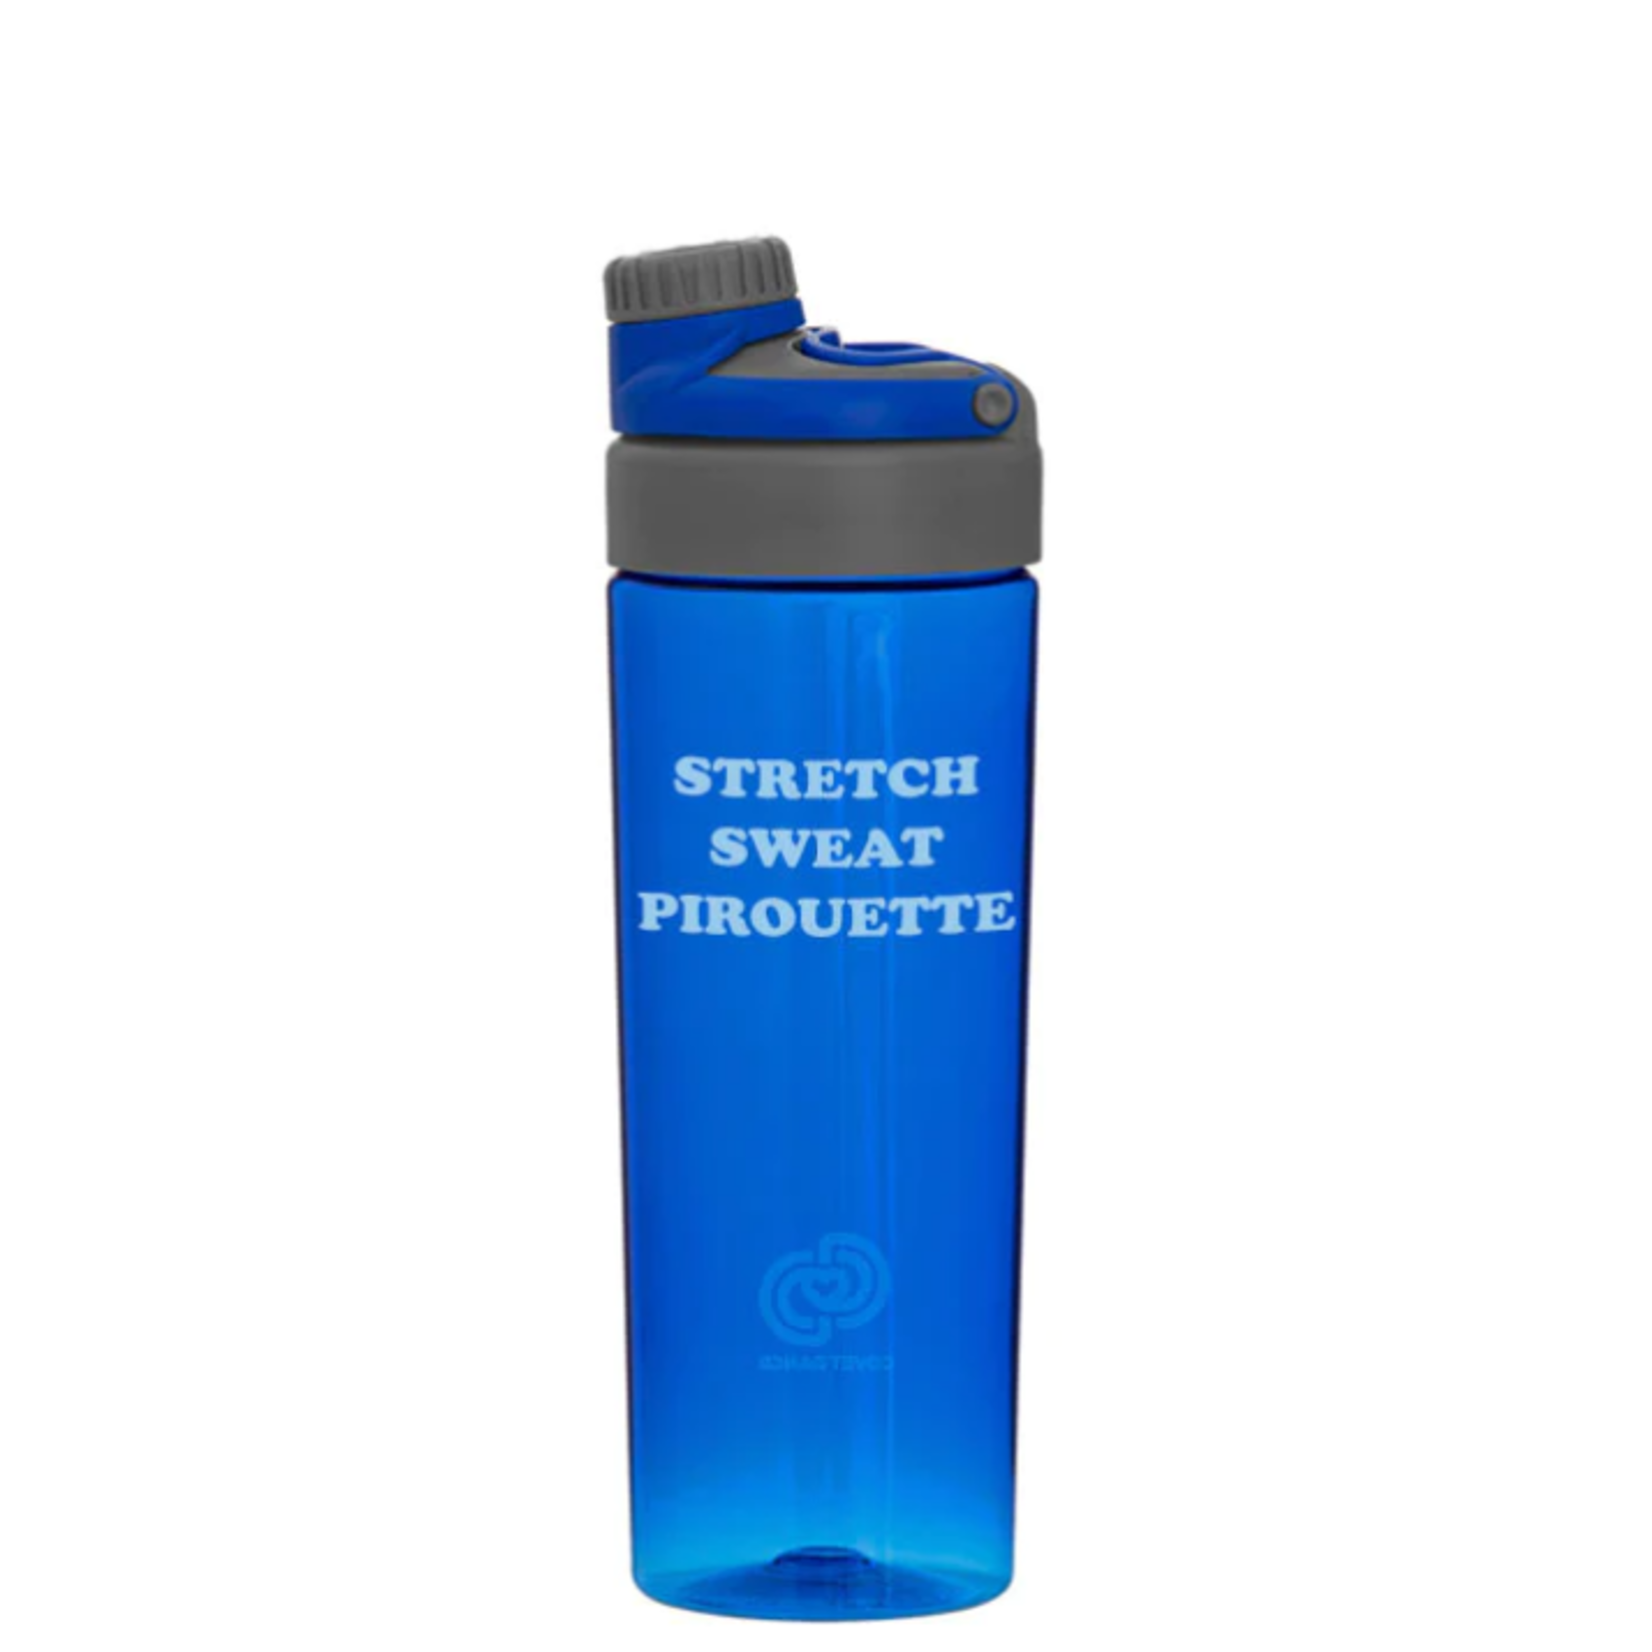 Covet Covet Stretch Sweat Pirouette Water Bottle